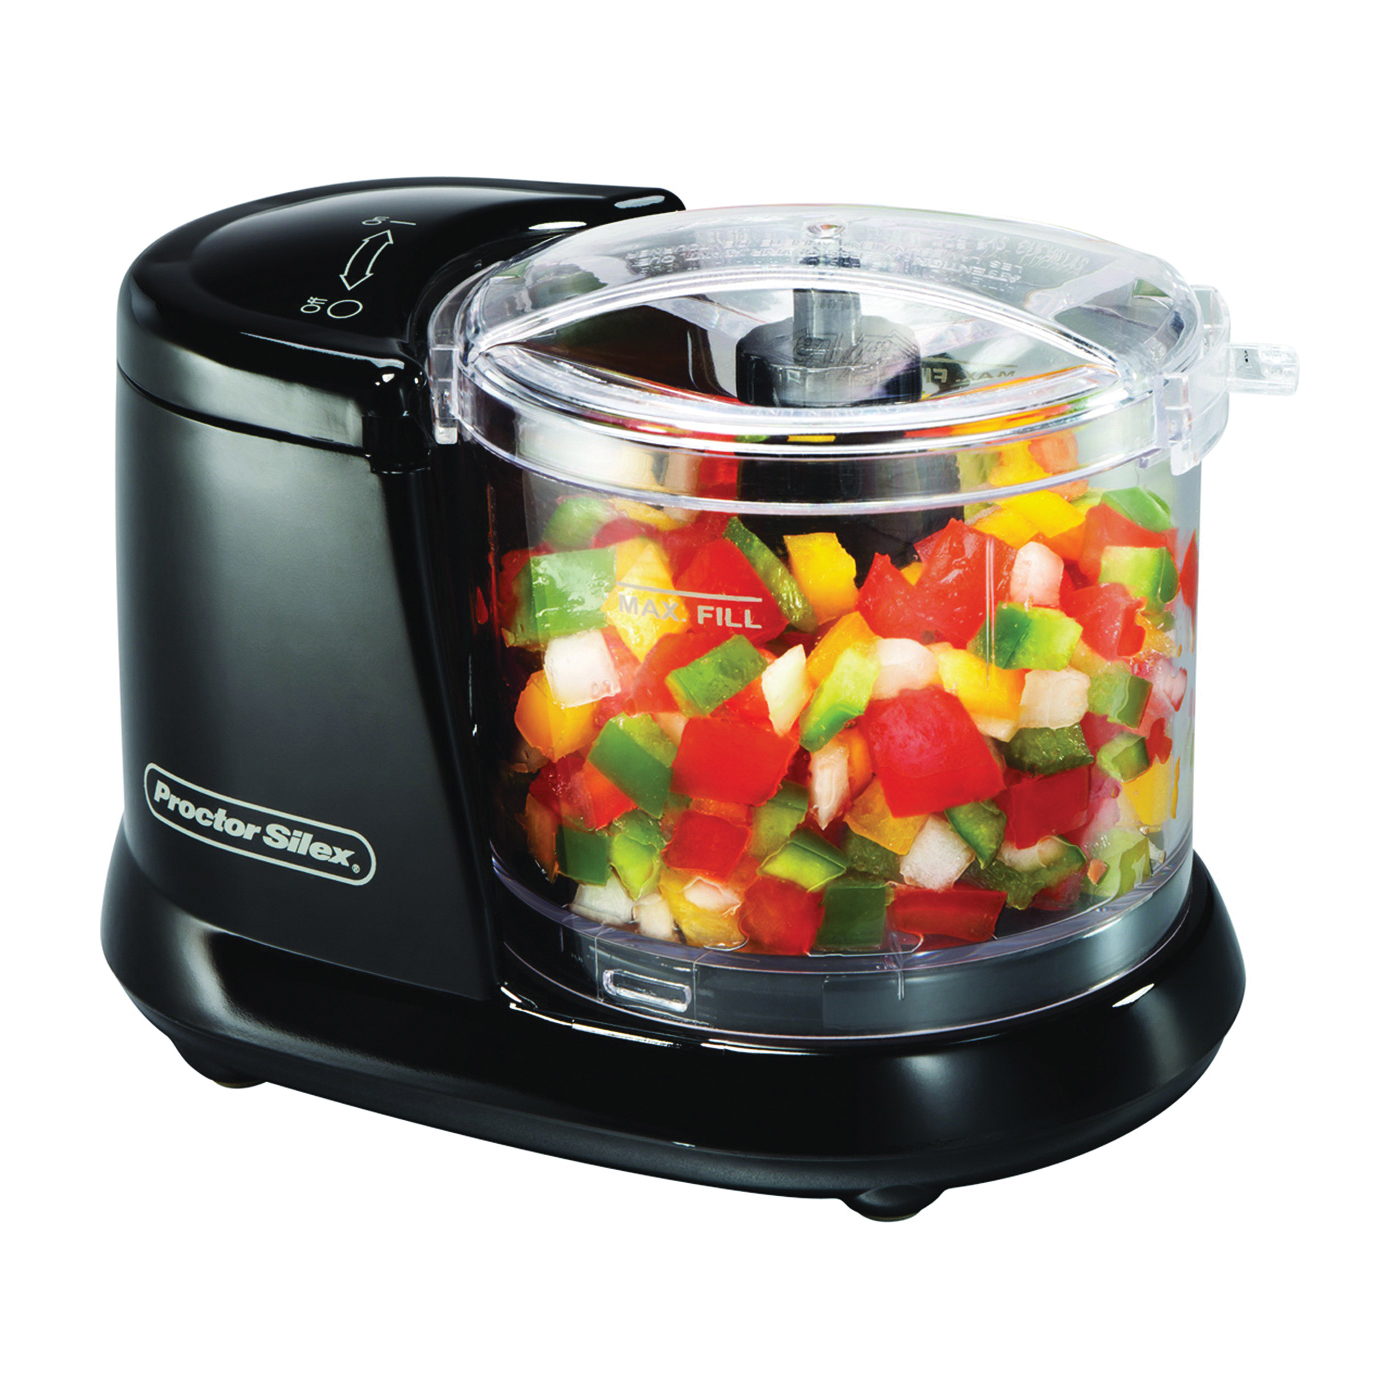 Oster FPSTMC3321 3-Cup Mini Chopper with Whisk, Black - 4